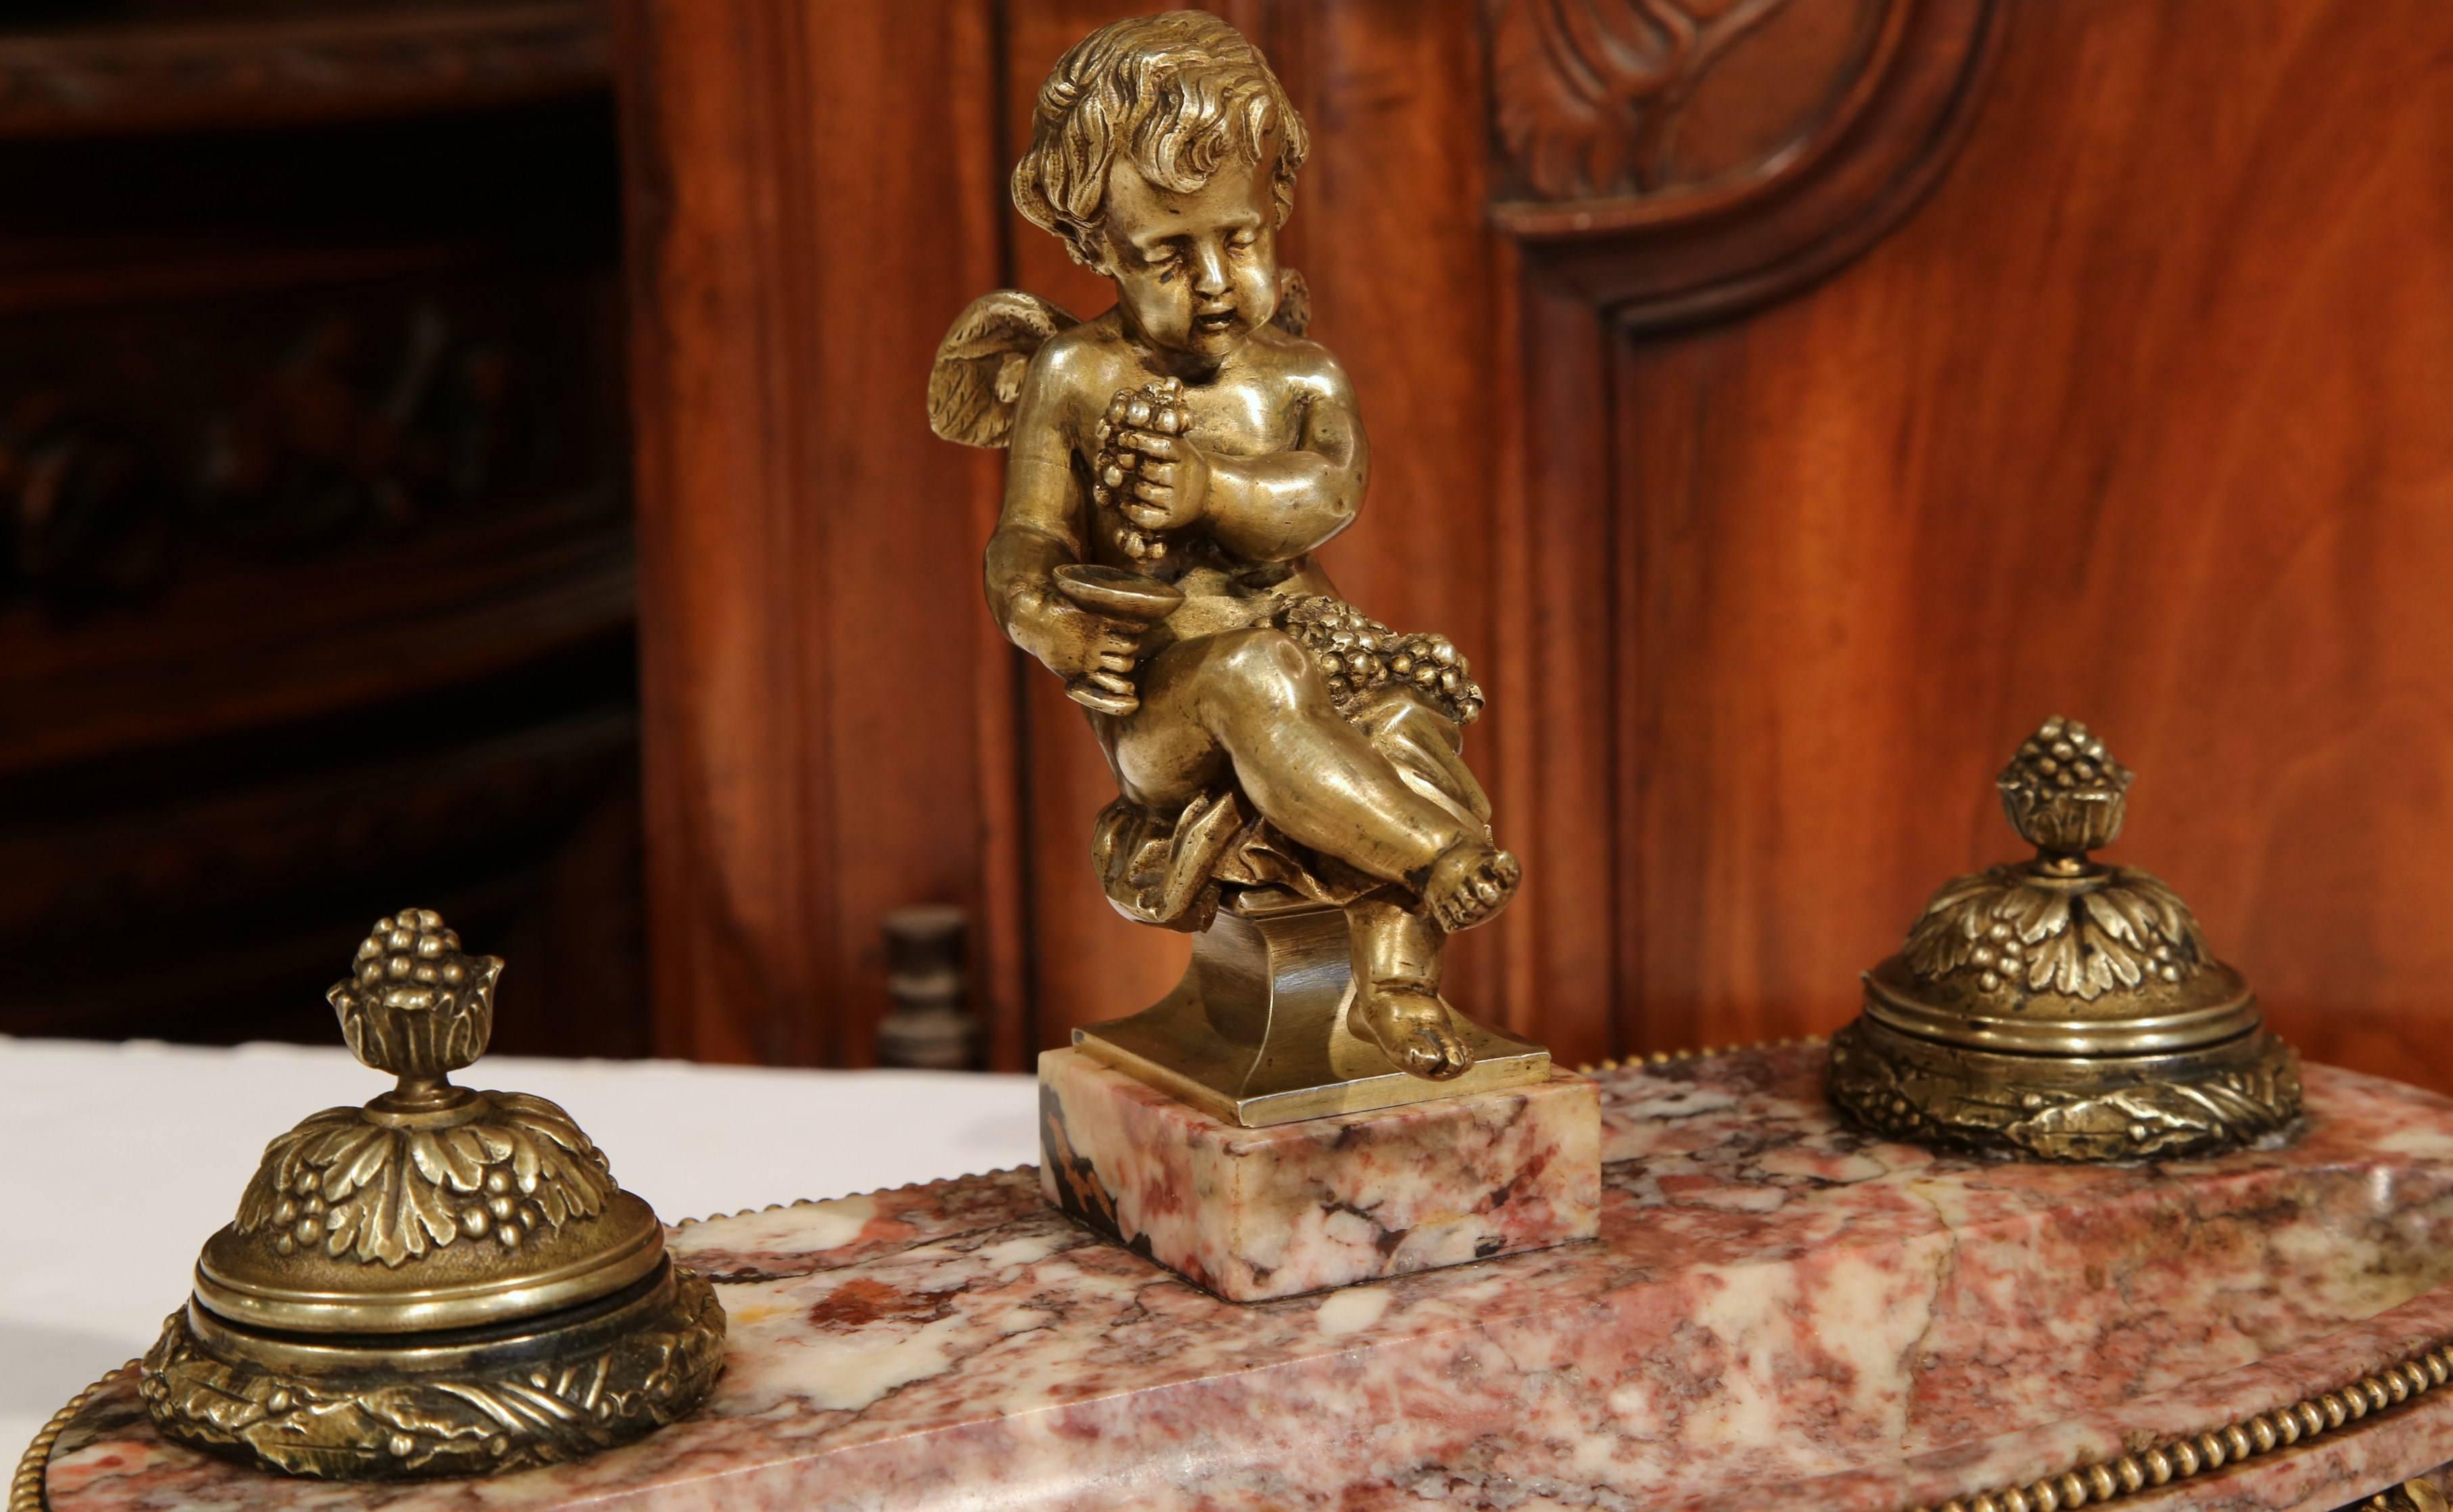 This fine, antique bronze and marble inkwell was crafted in France circa 1860. The inkwell is decorated with a seated putti with wings holding grapes. On either side of the cherub, both ink holders are lined with their original glass containers (one